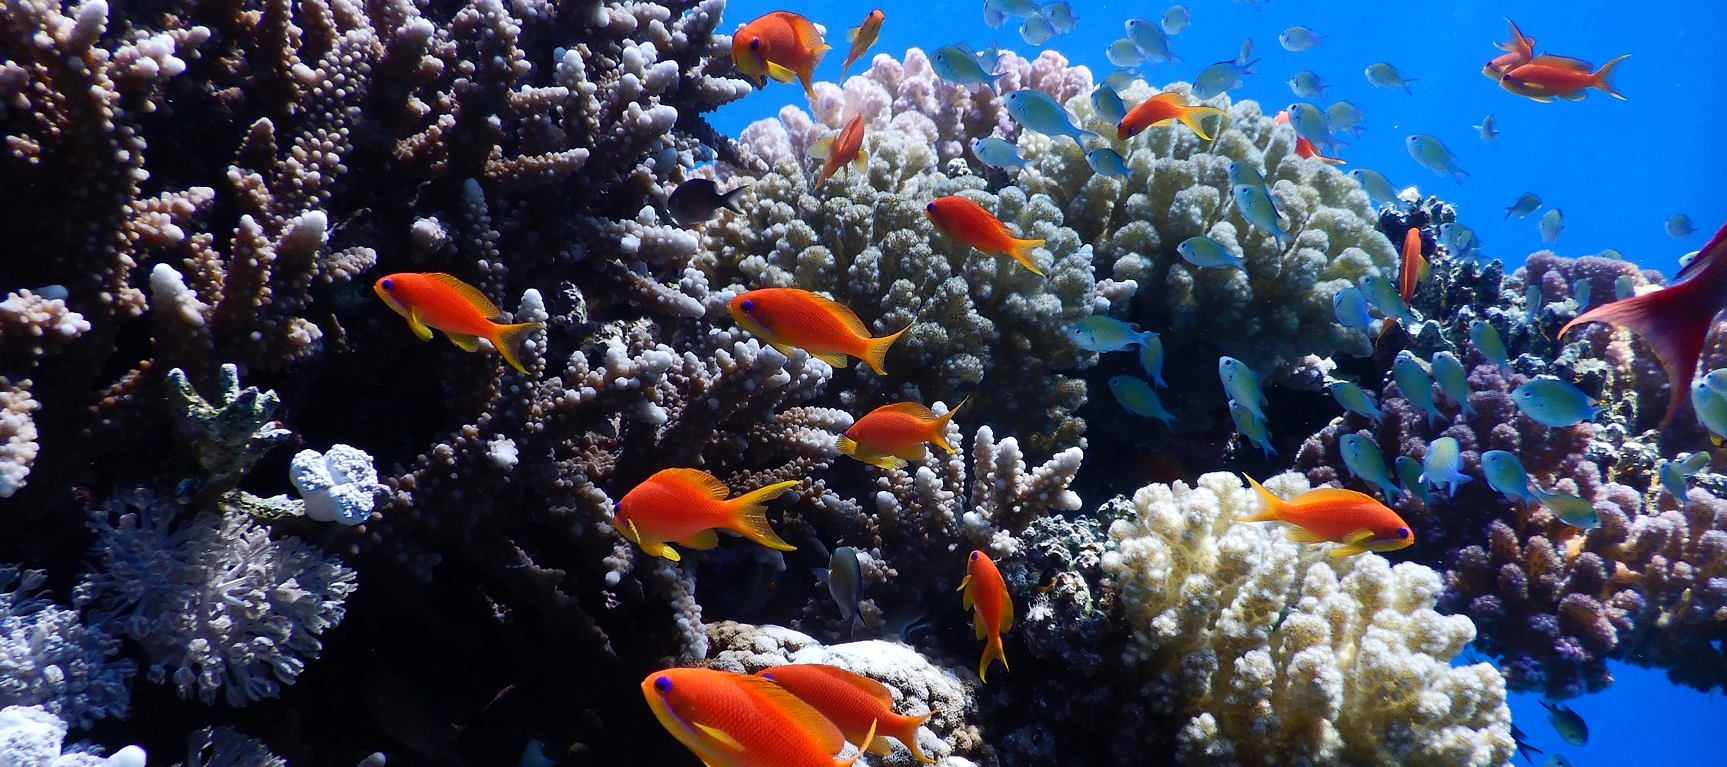 Red Sea Reef Foundation – tagline goes here